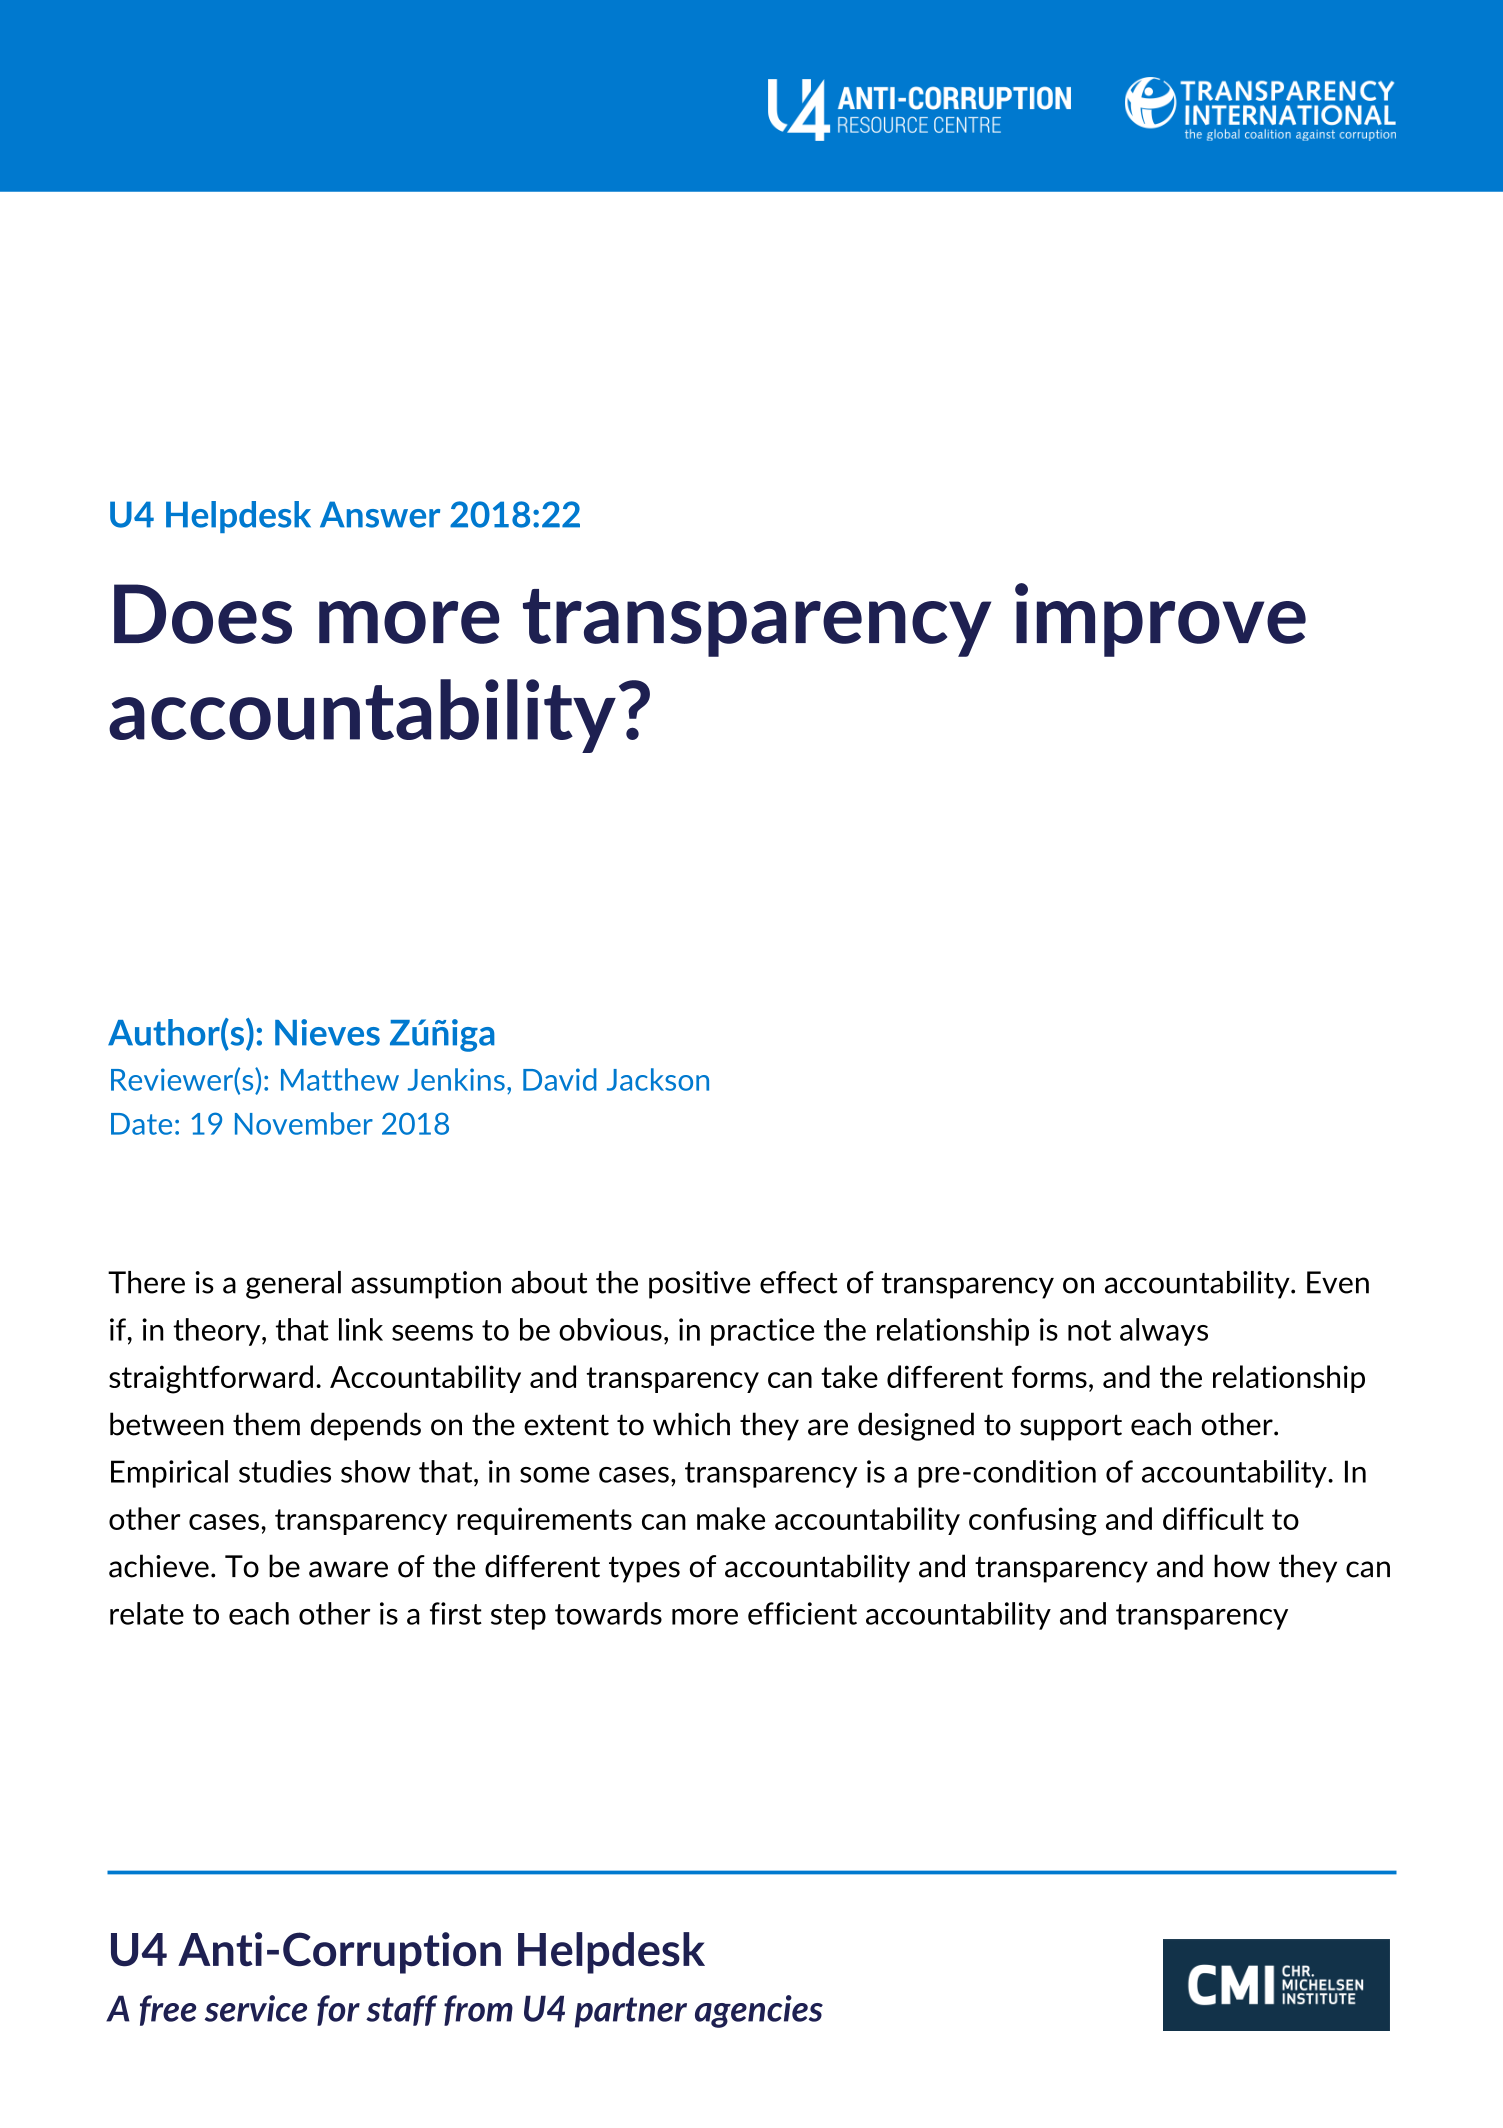 Does more transparency improve accountability?